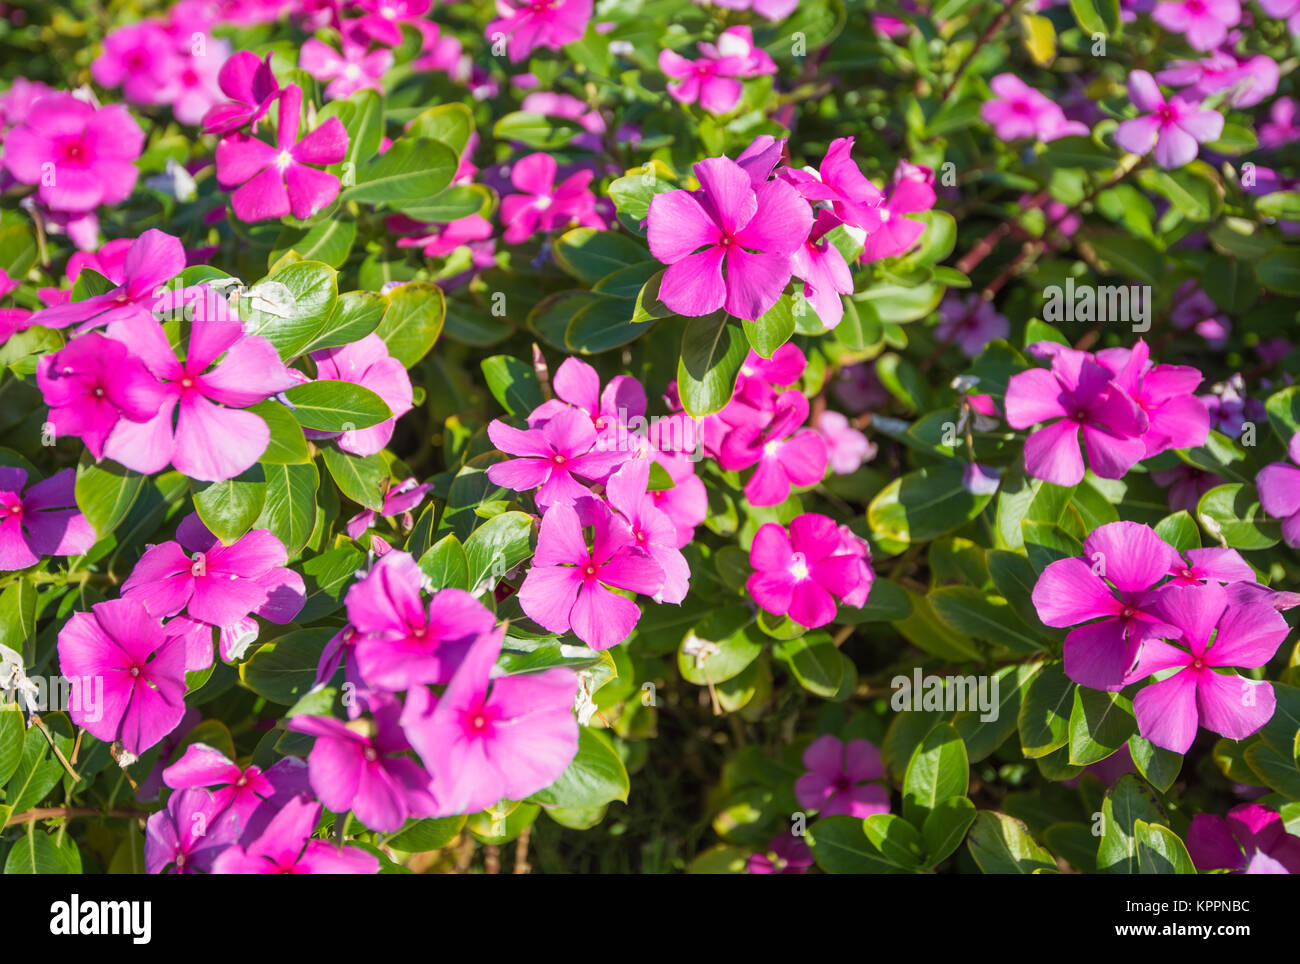 Closeup detail of a purple flowering rose periwinkle plant catharanthus roseus in a formal landscaped garden Stock Photo